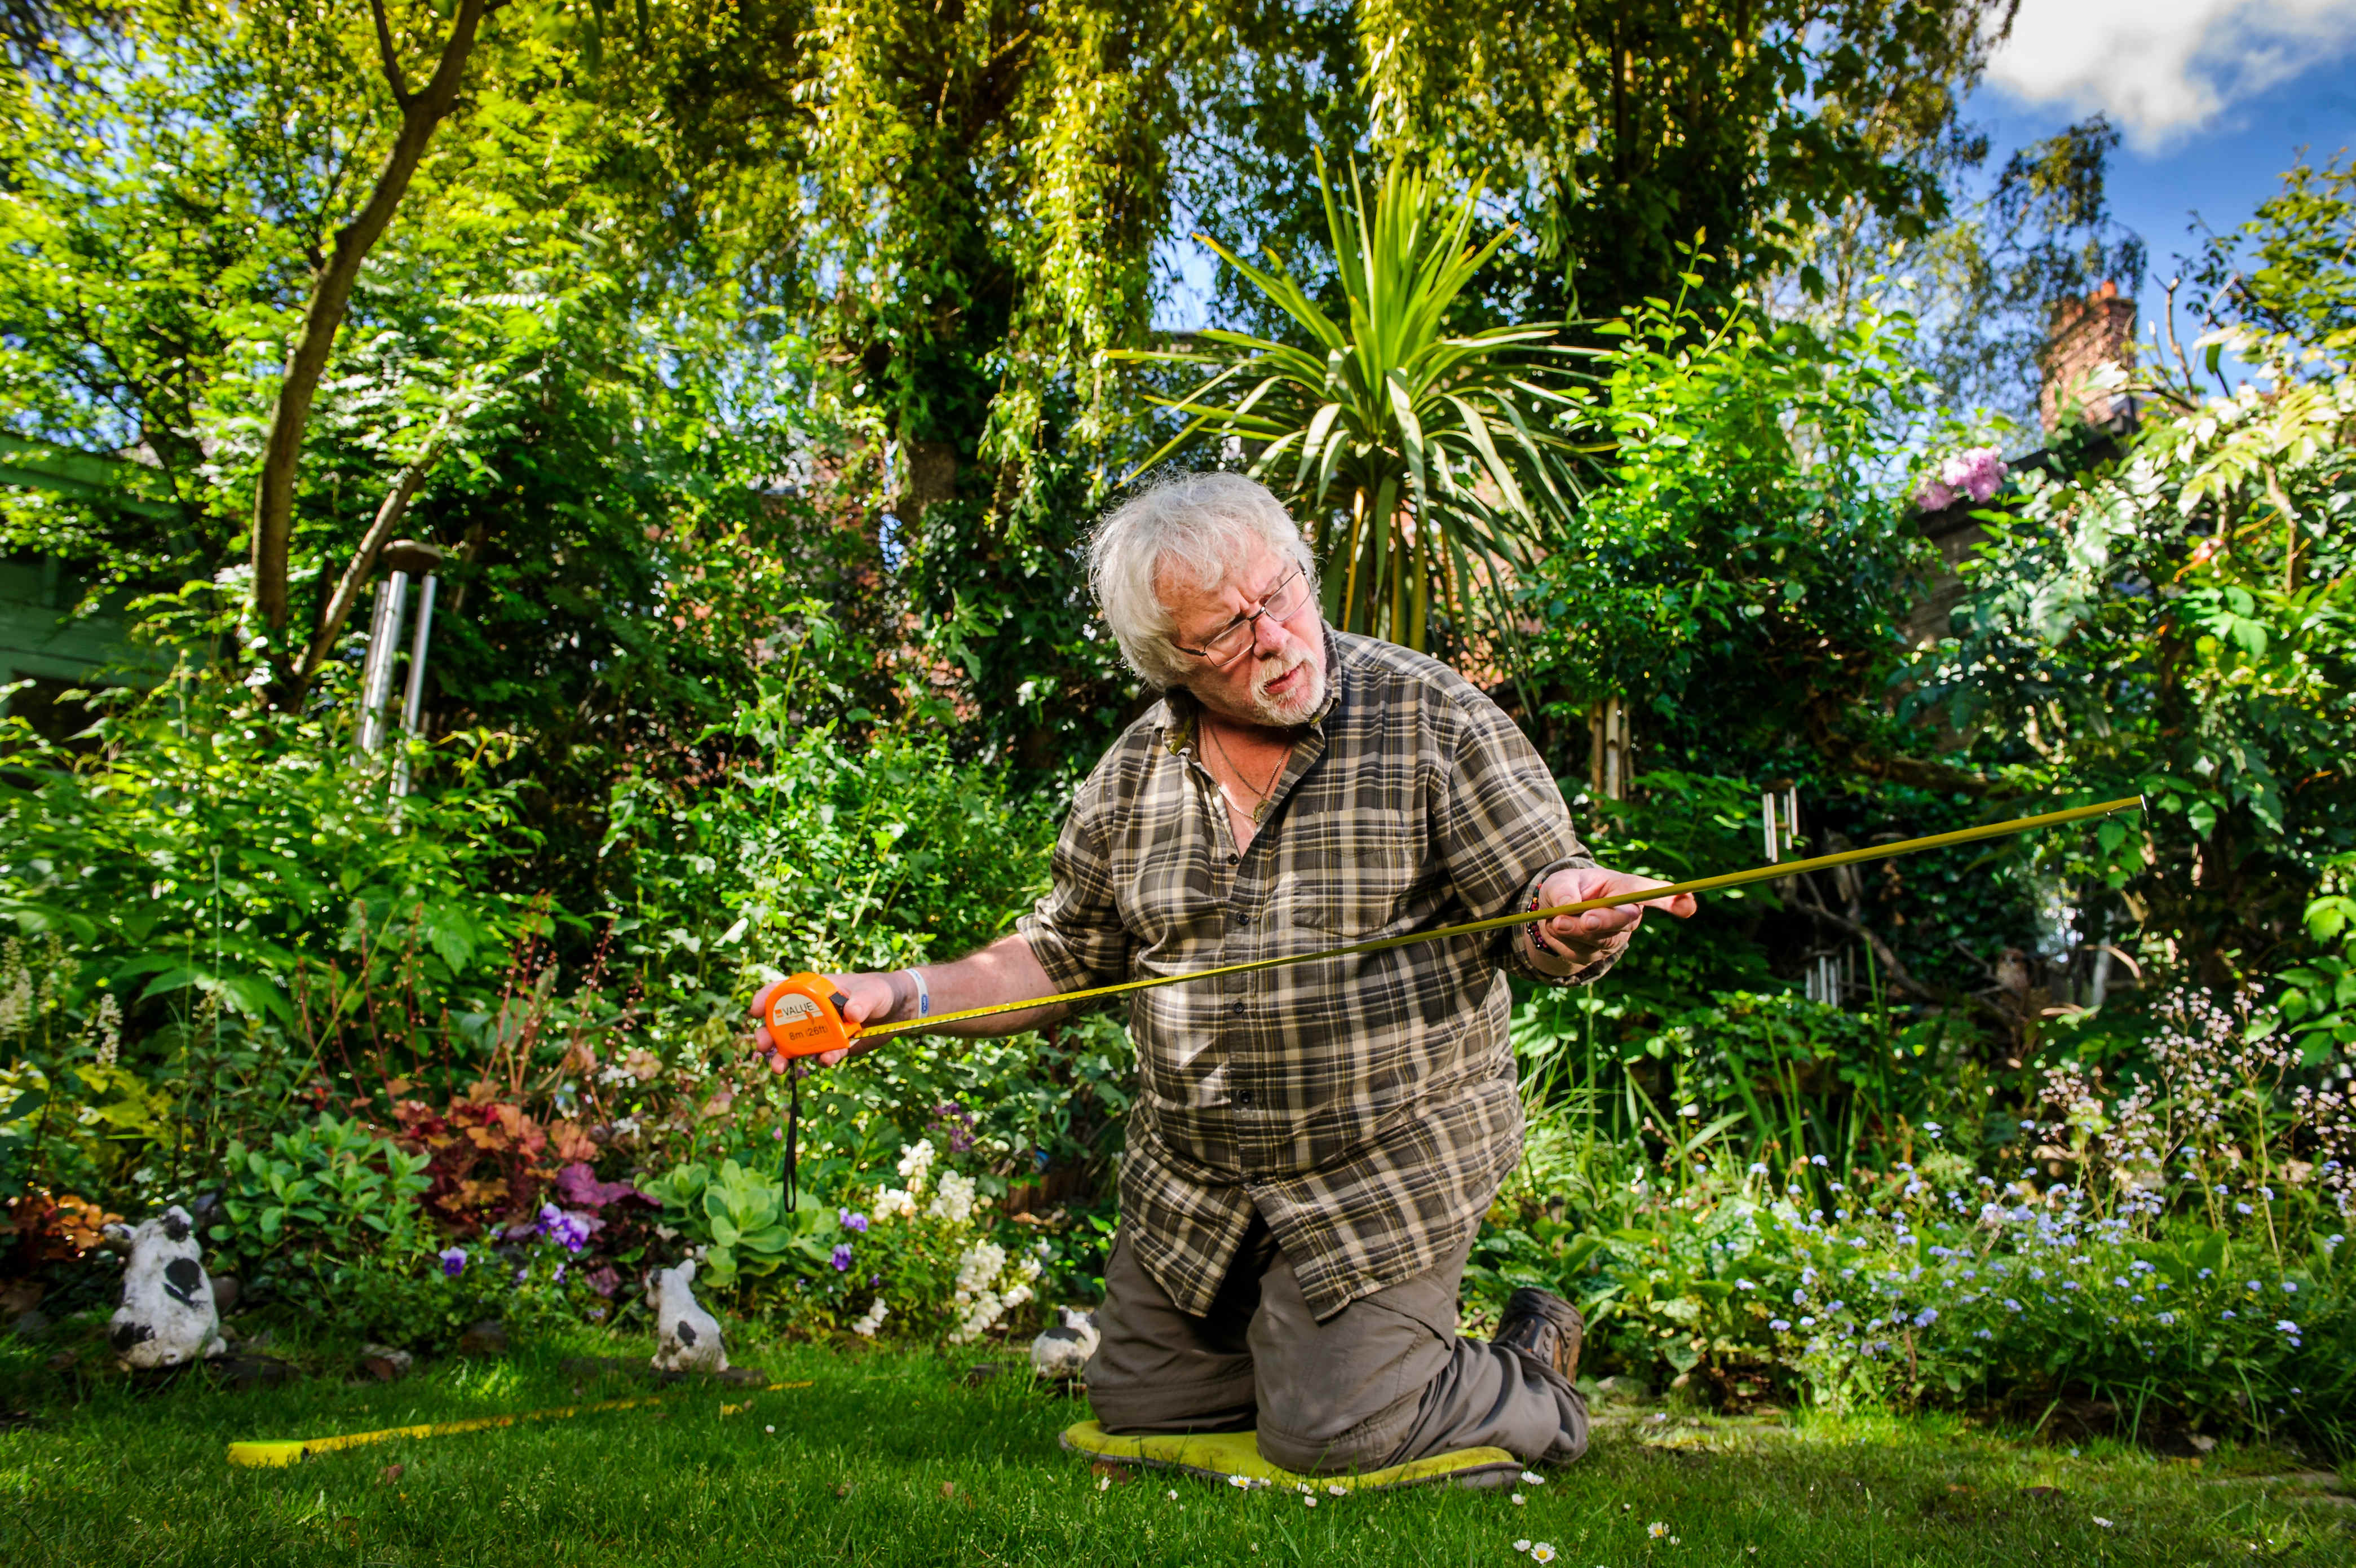 TV presenter Bill Oddie supports green-fingered fundraising campaign The Great Garden Give